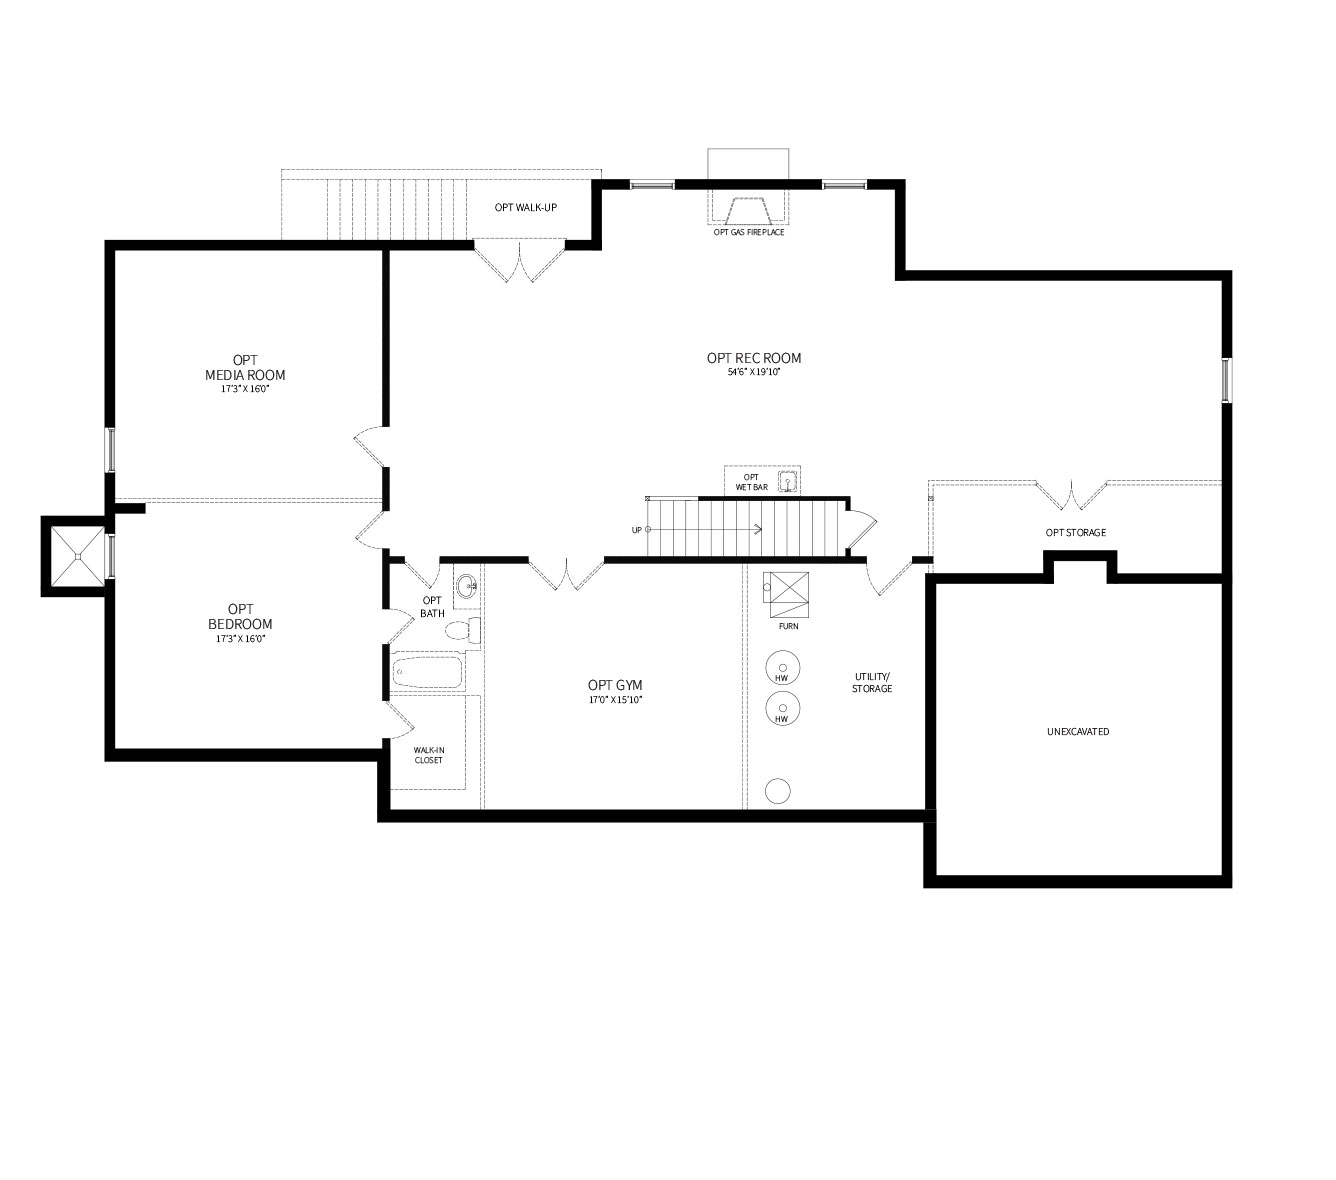 A proposed optional basement plan for the McLean model featuring Rec Room, Media Room, Gym and Bedroom with Bath.